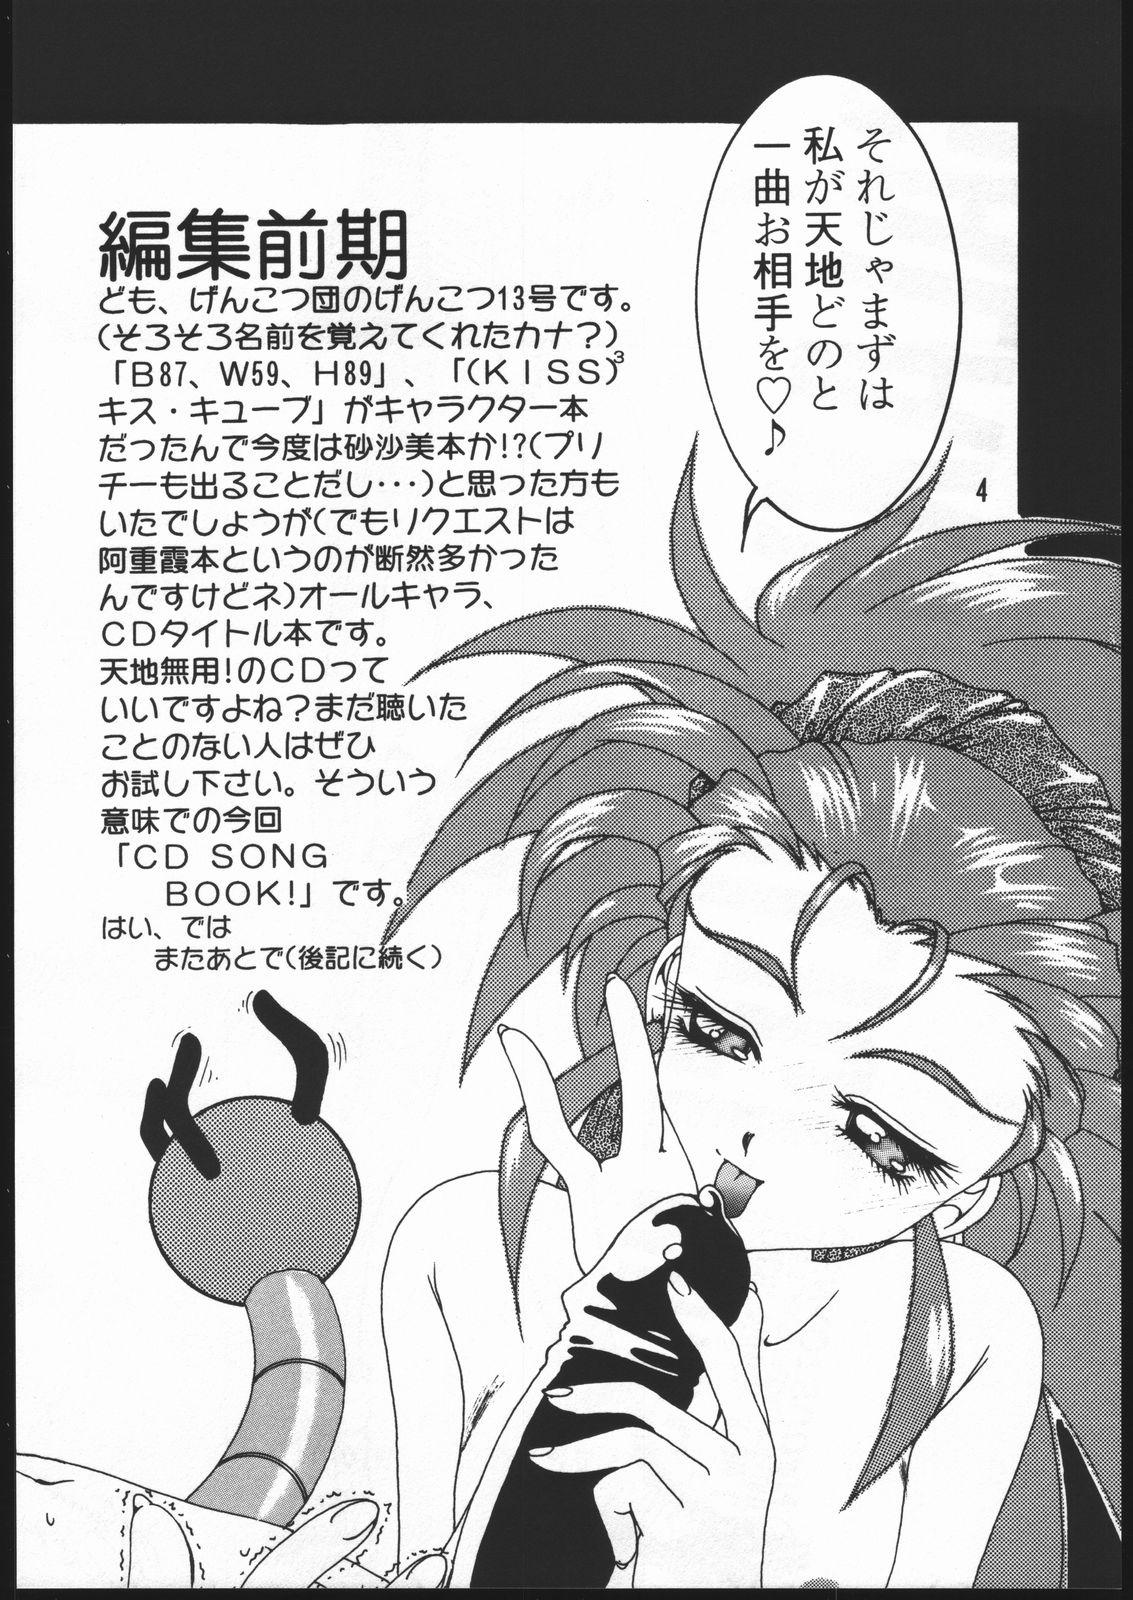 Femboy CD SONG BOOK - Tenchi muyo Red Head - Page 3